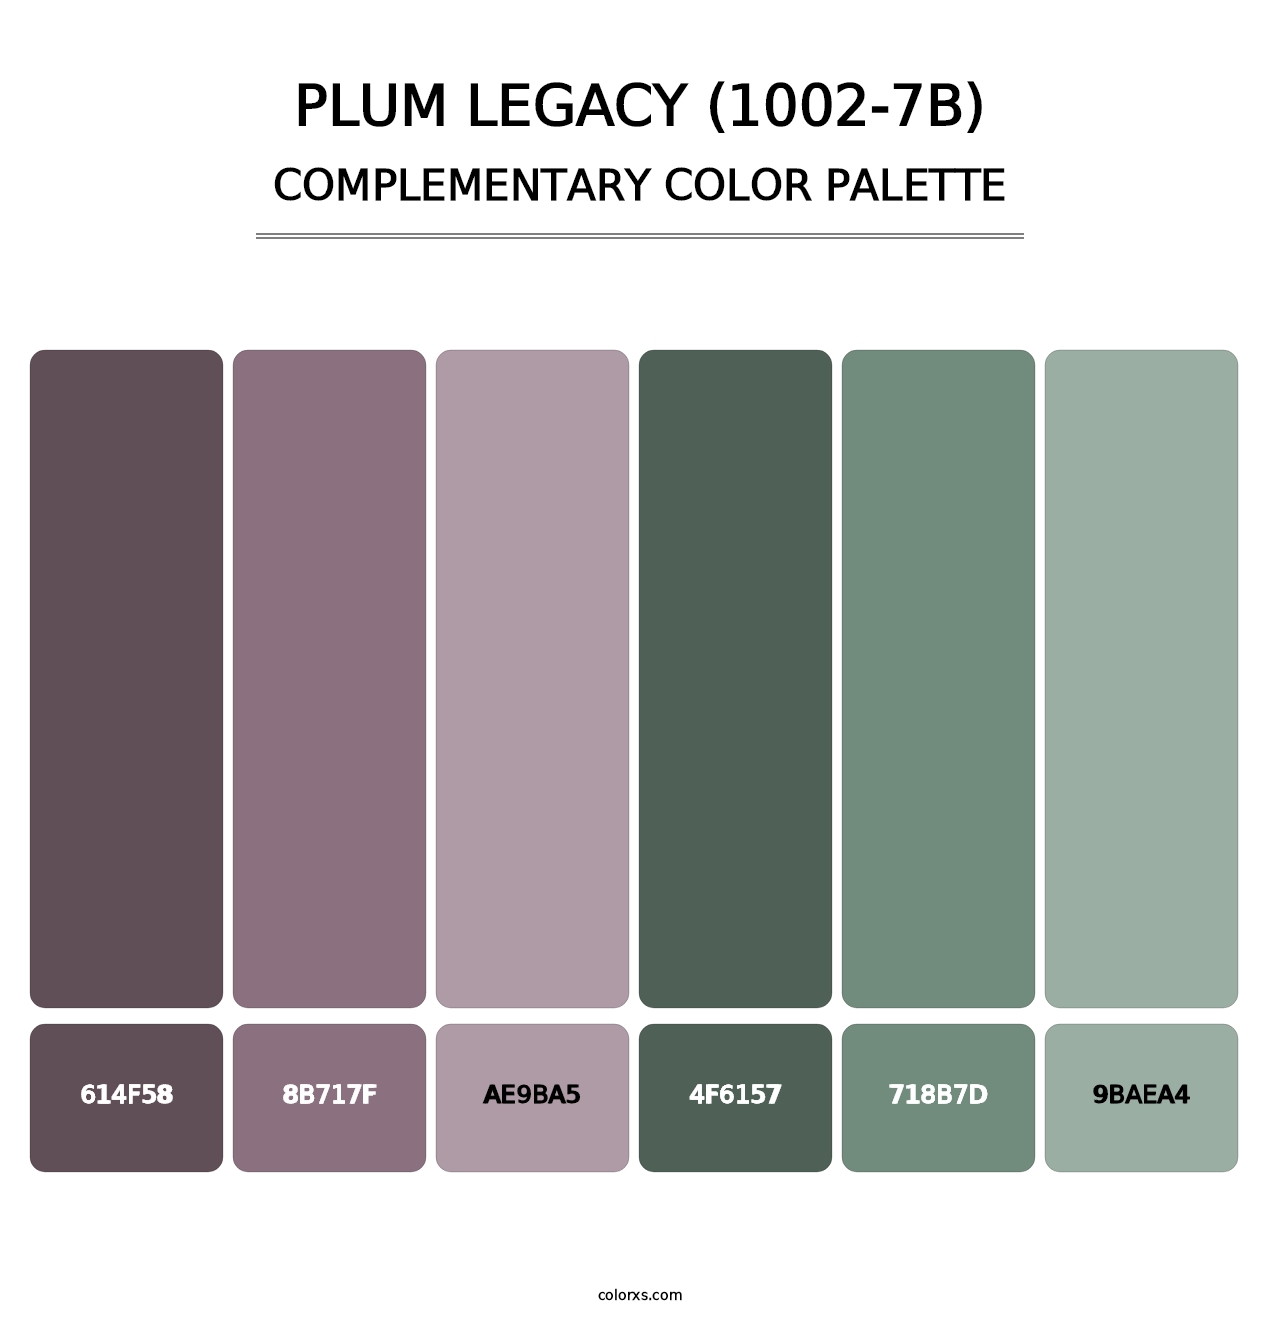 Plum Legacy (1002-7B) - Complementary Color Palette